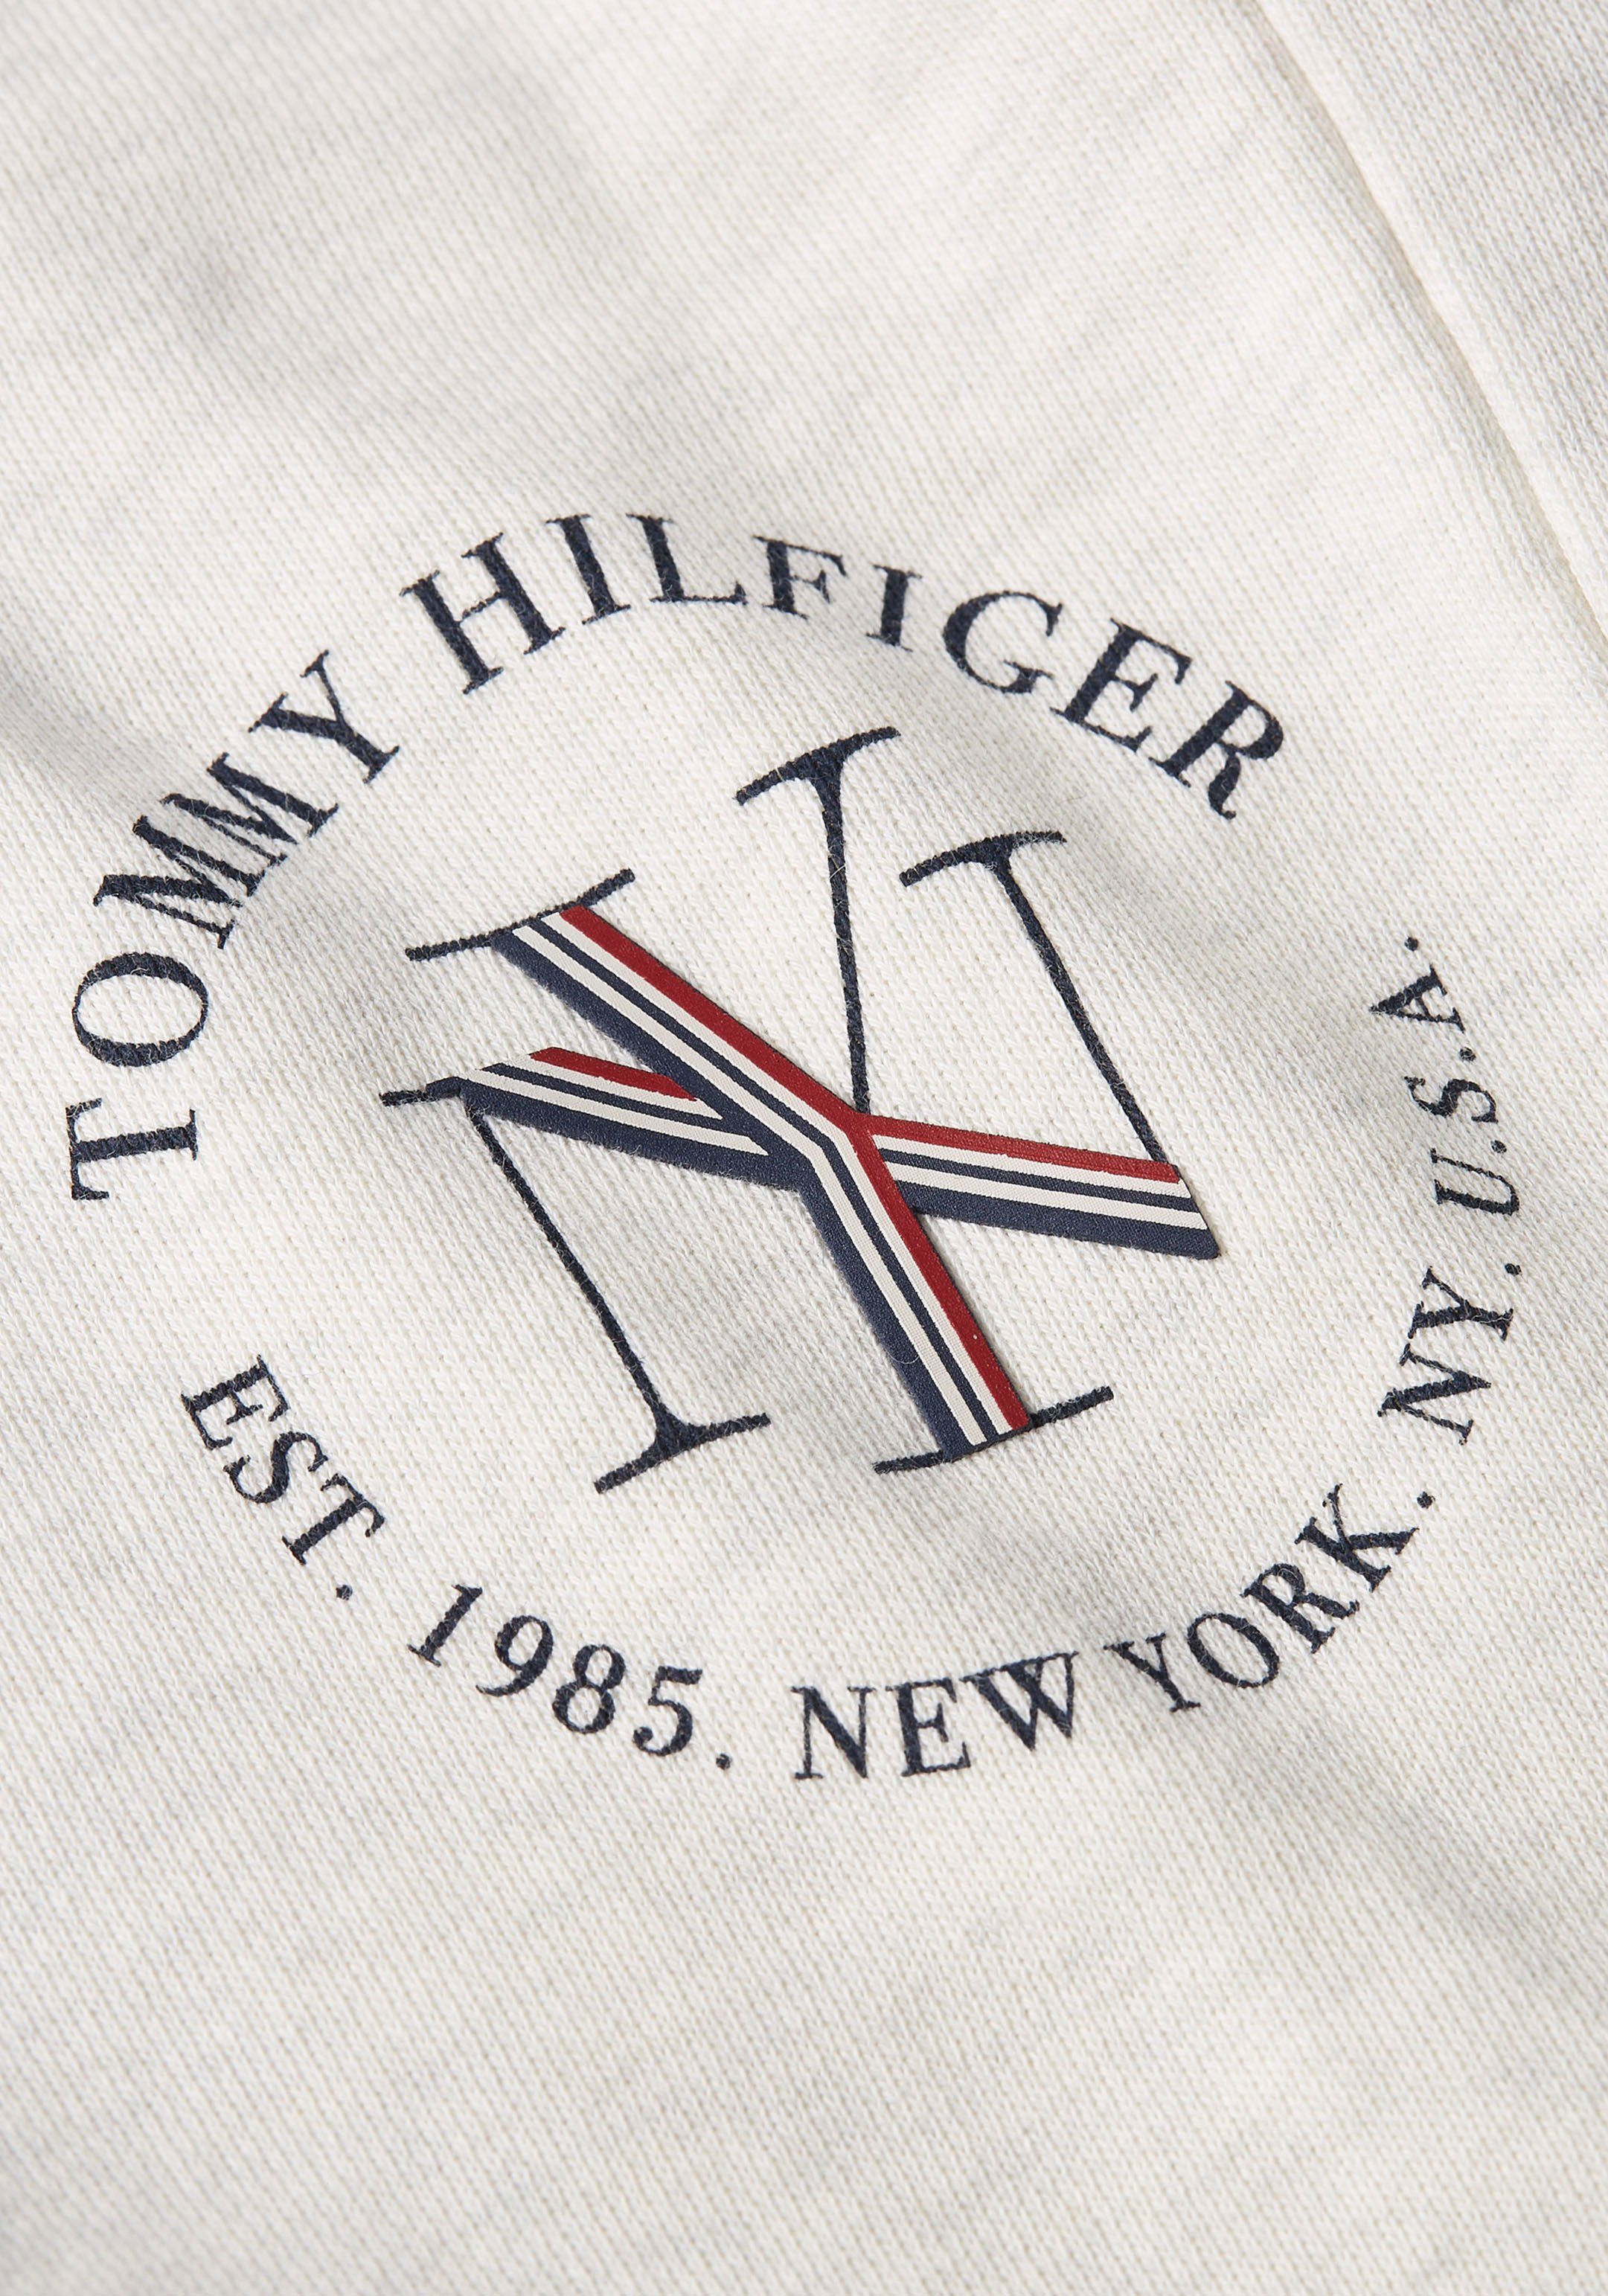 Tommy Hilfiger Sweatpants Tommy TAPERED NYC Markenlabel White-Heather mit Hilfiger ROUNDALL SWEATPANTS